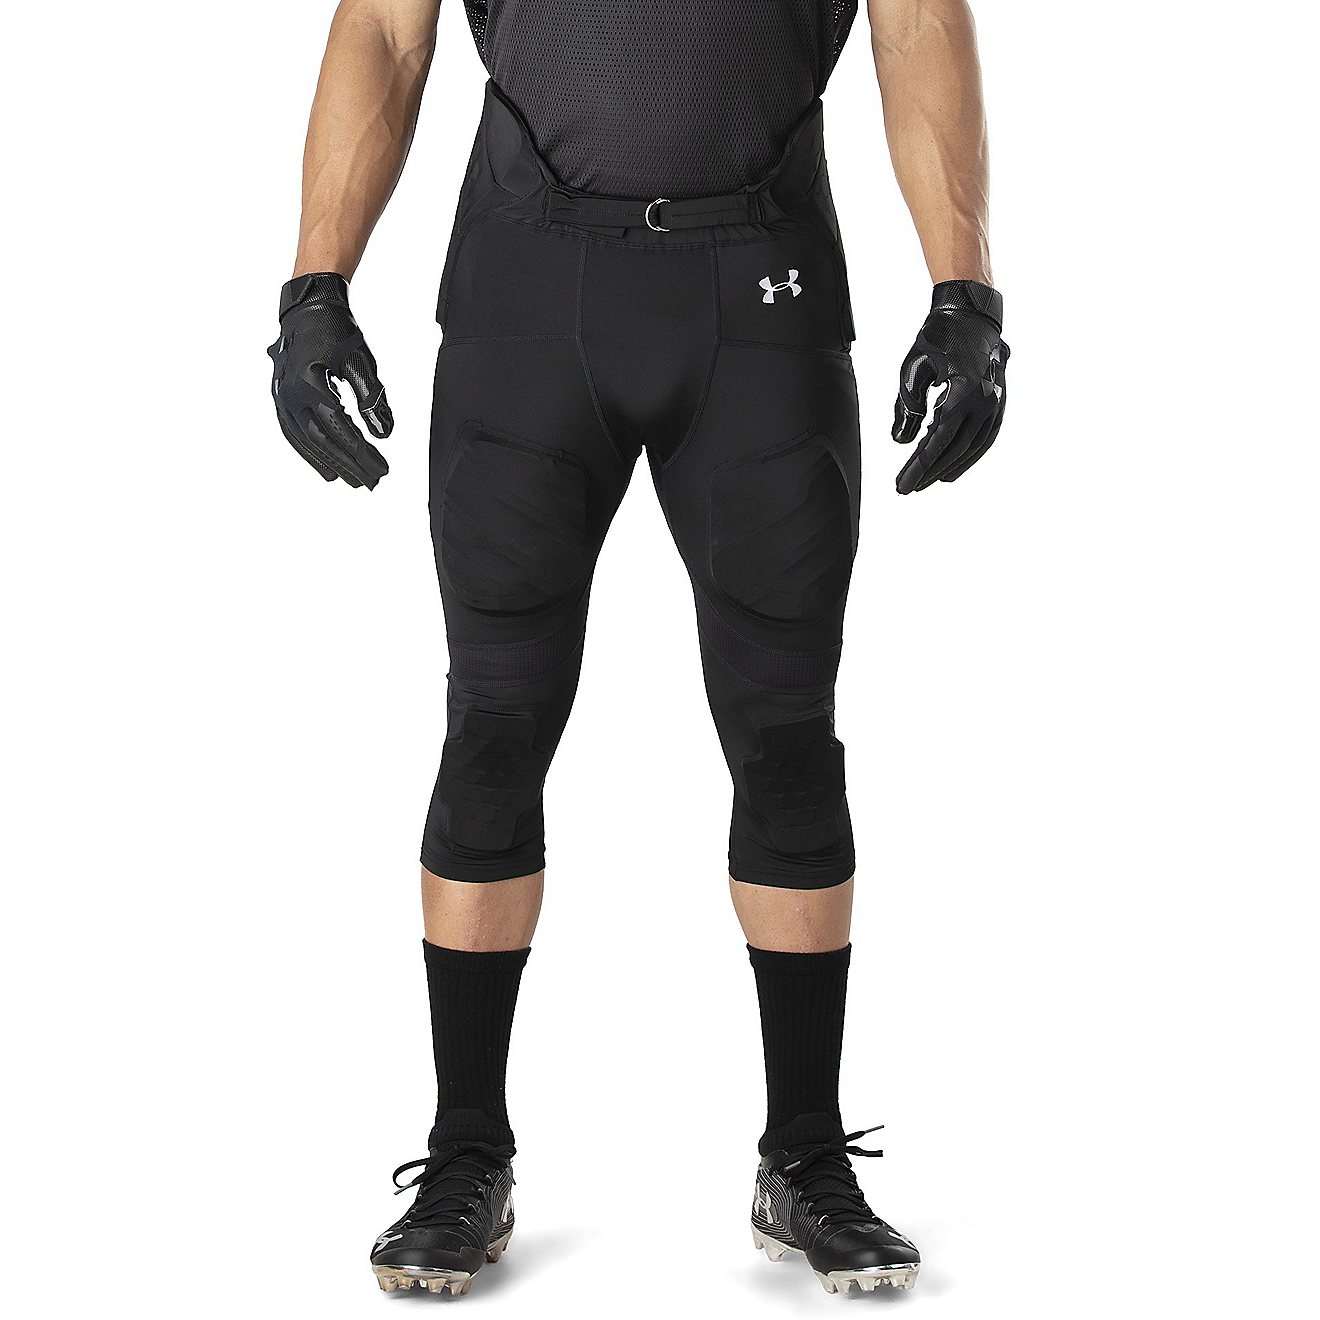 Details about   Under Armour Men's Power I Football Pant 